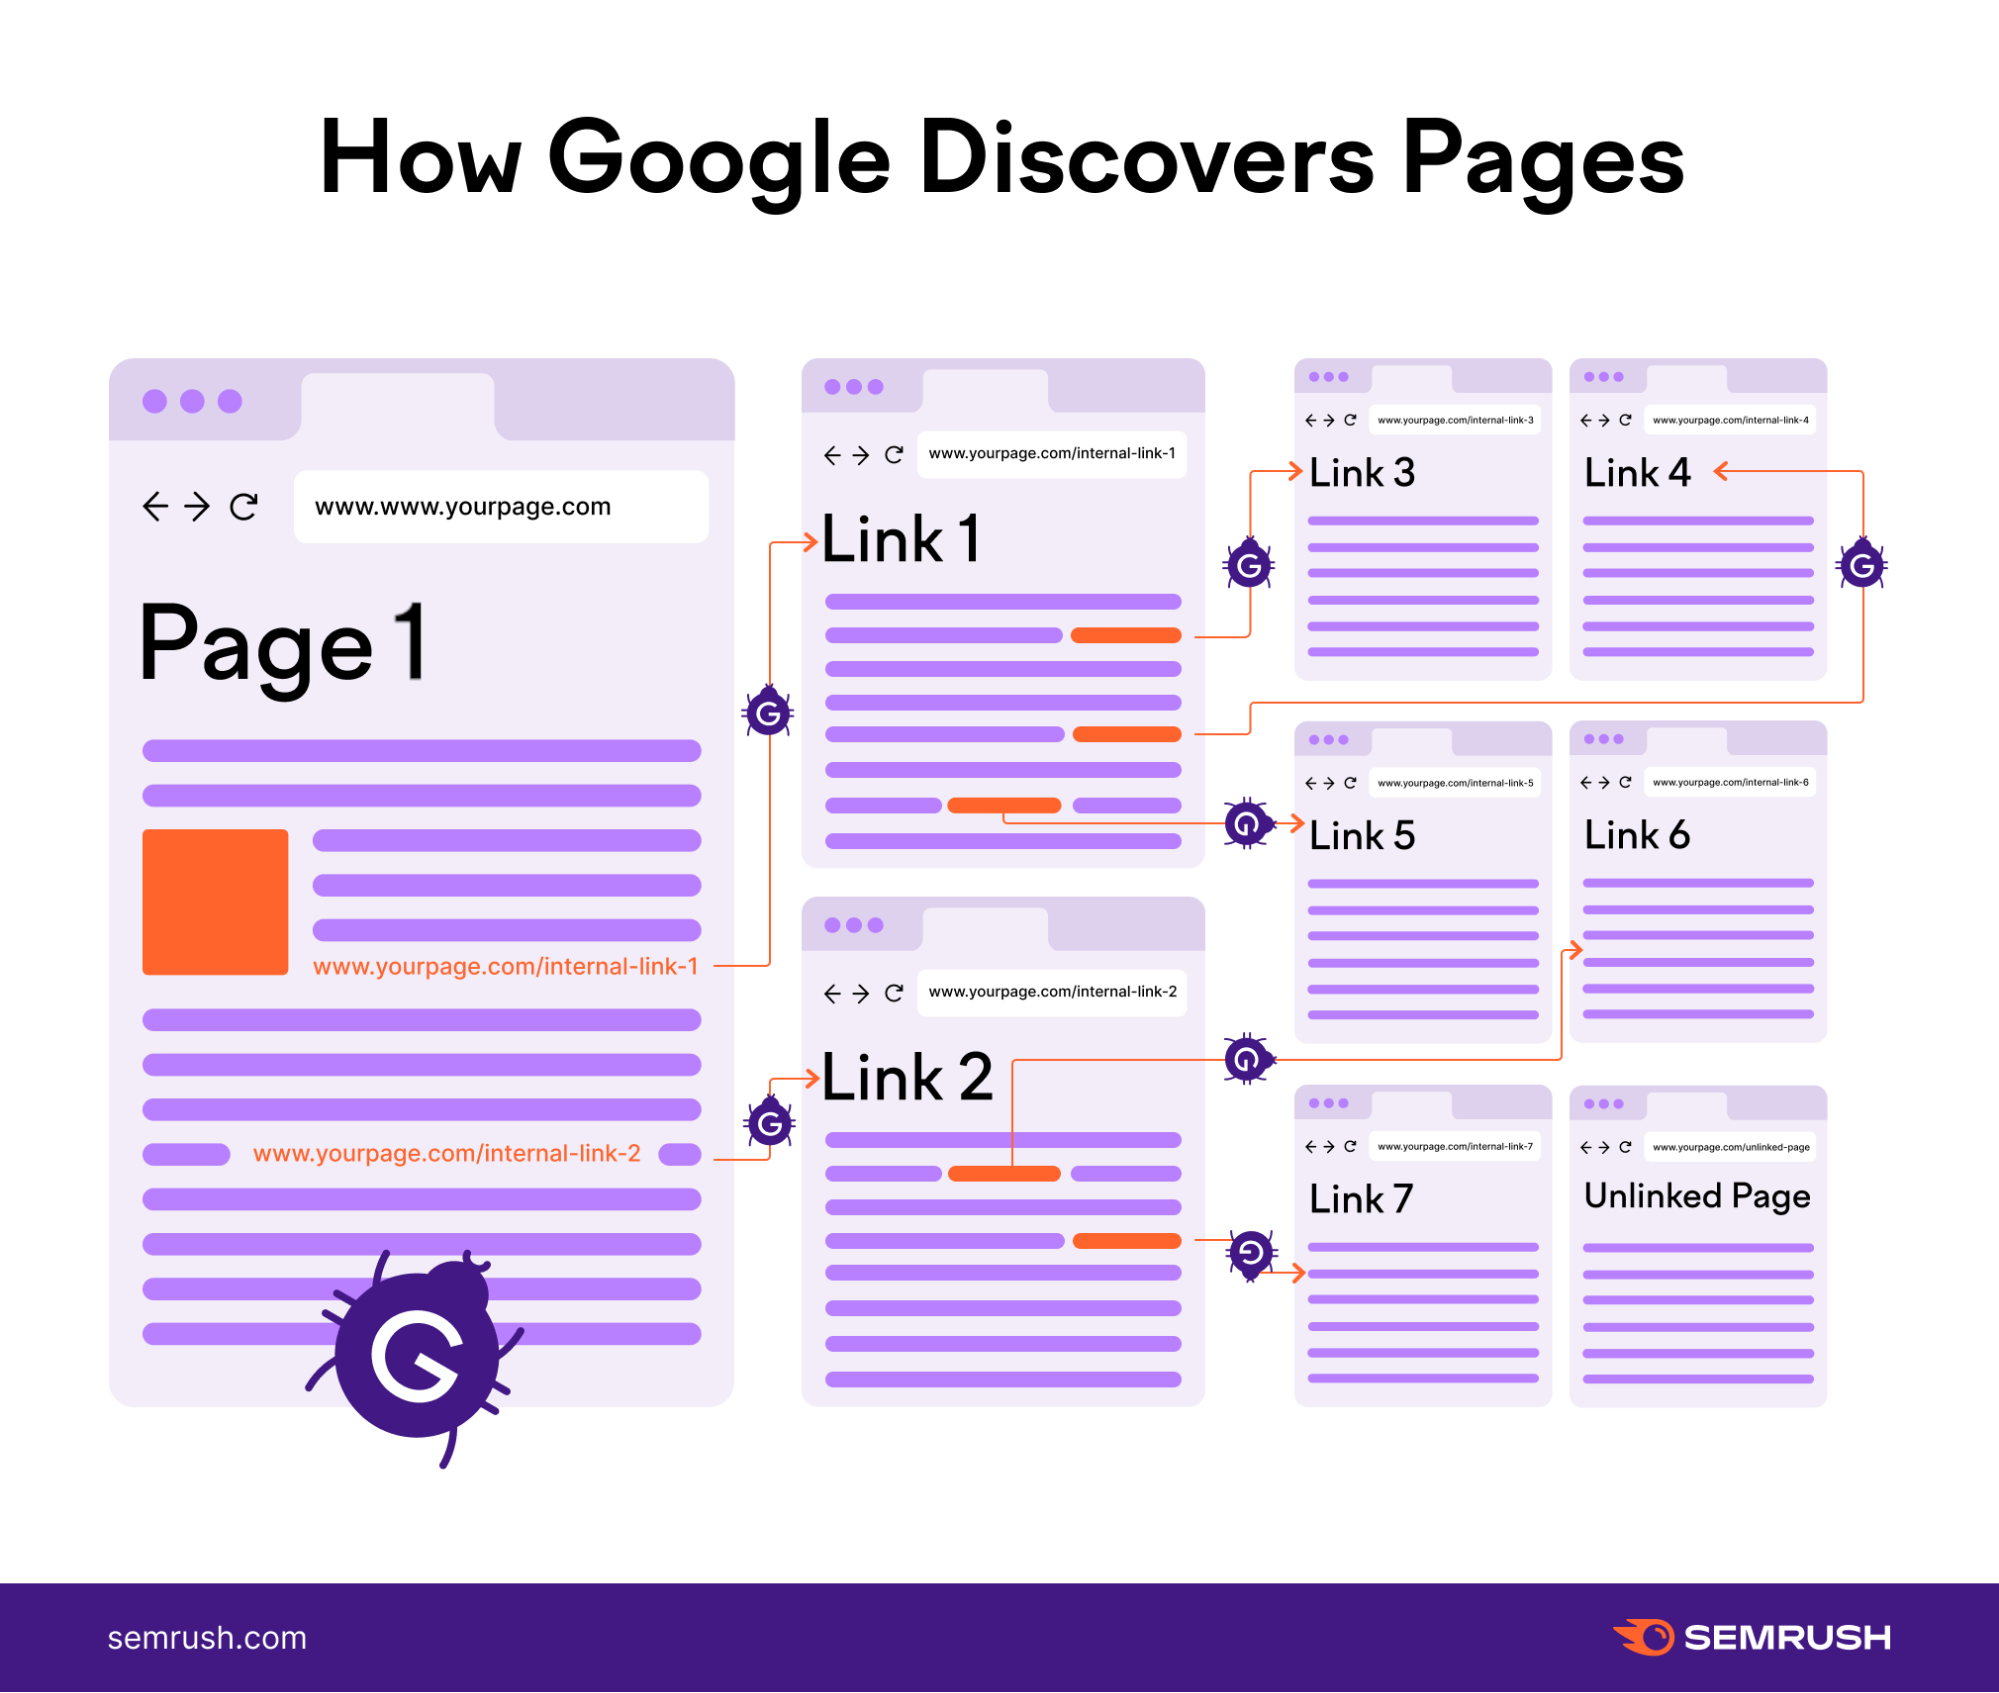 Illustration of how Google discovers pages